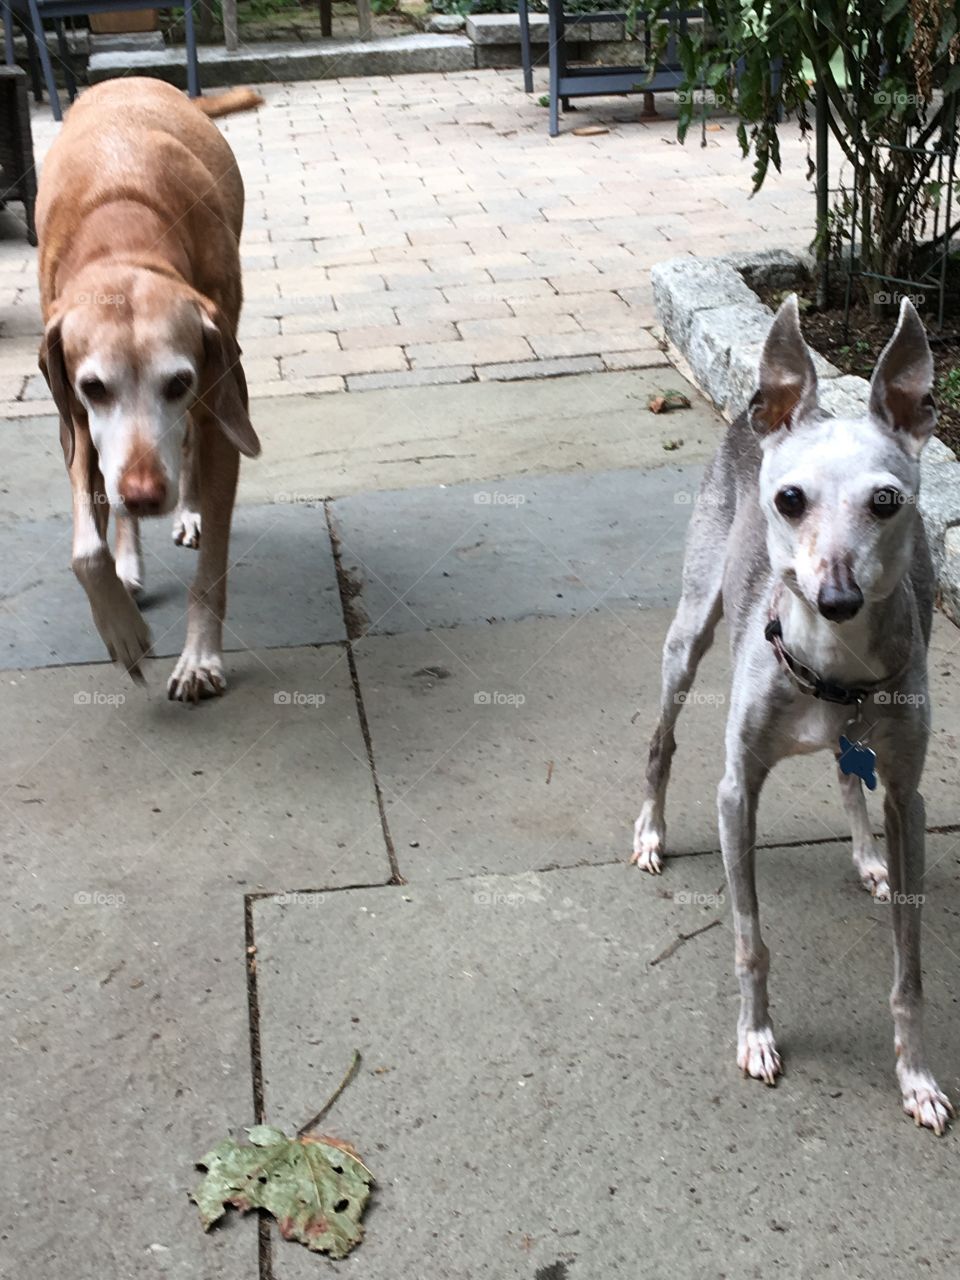 Vizsla & Italian Greyhound, older now & so lovable🐾💞They are walking towards me, from the backyard.